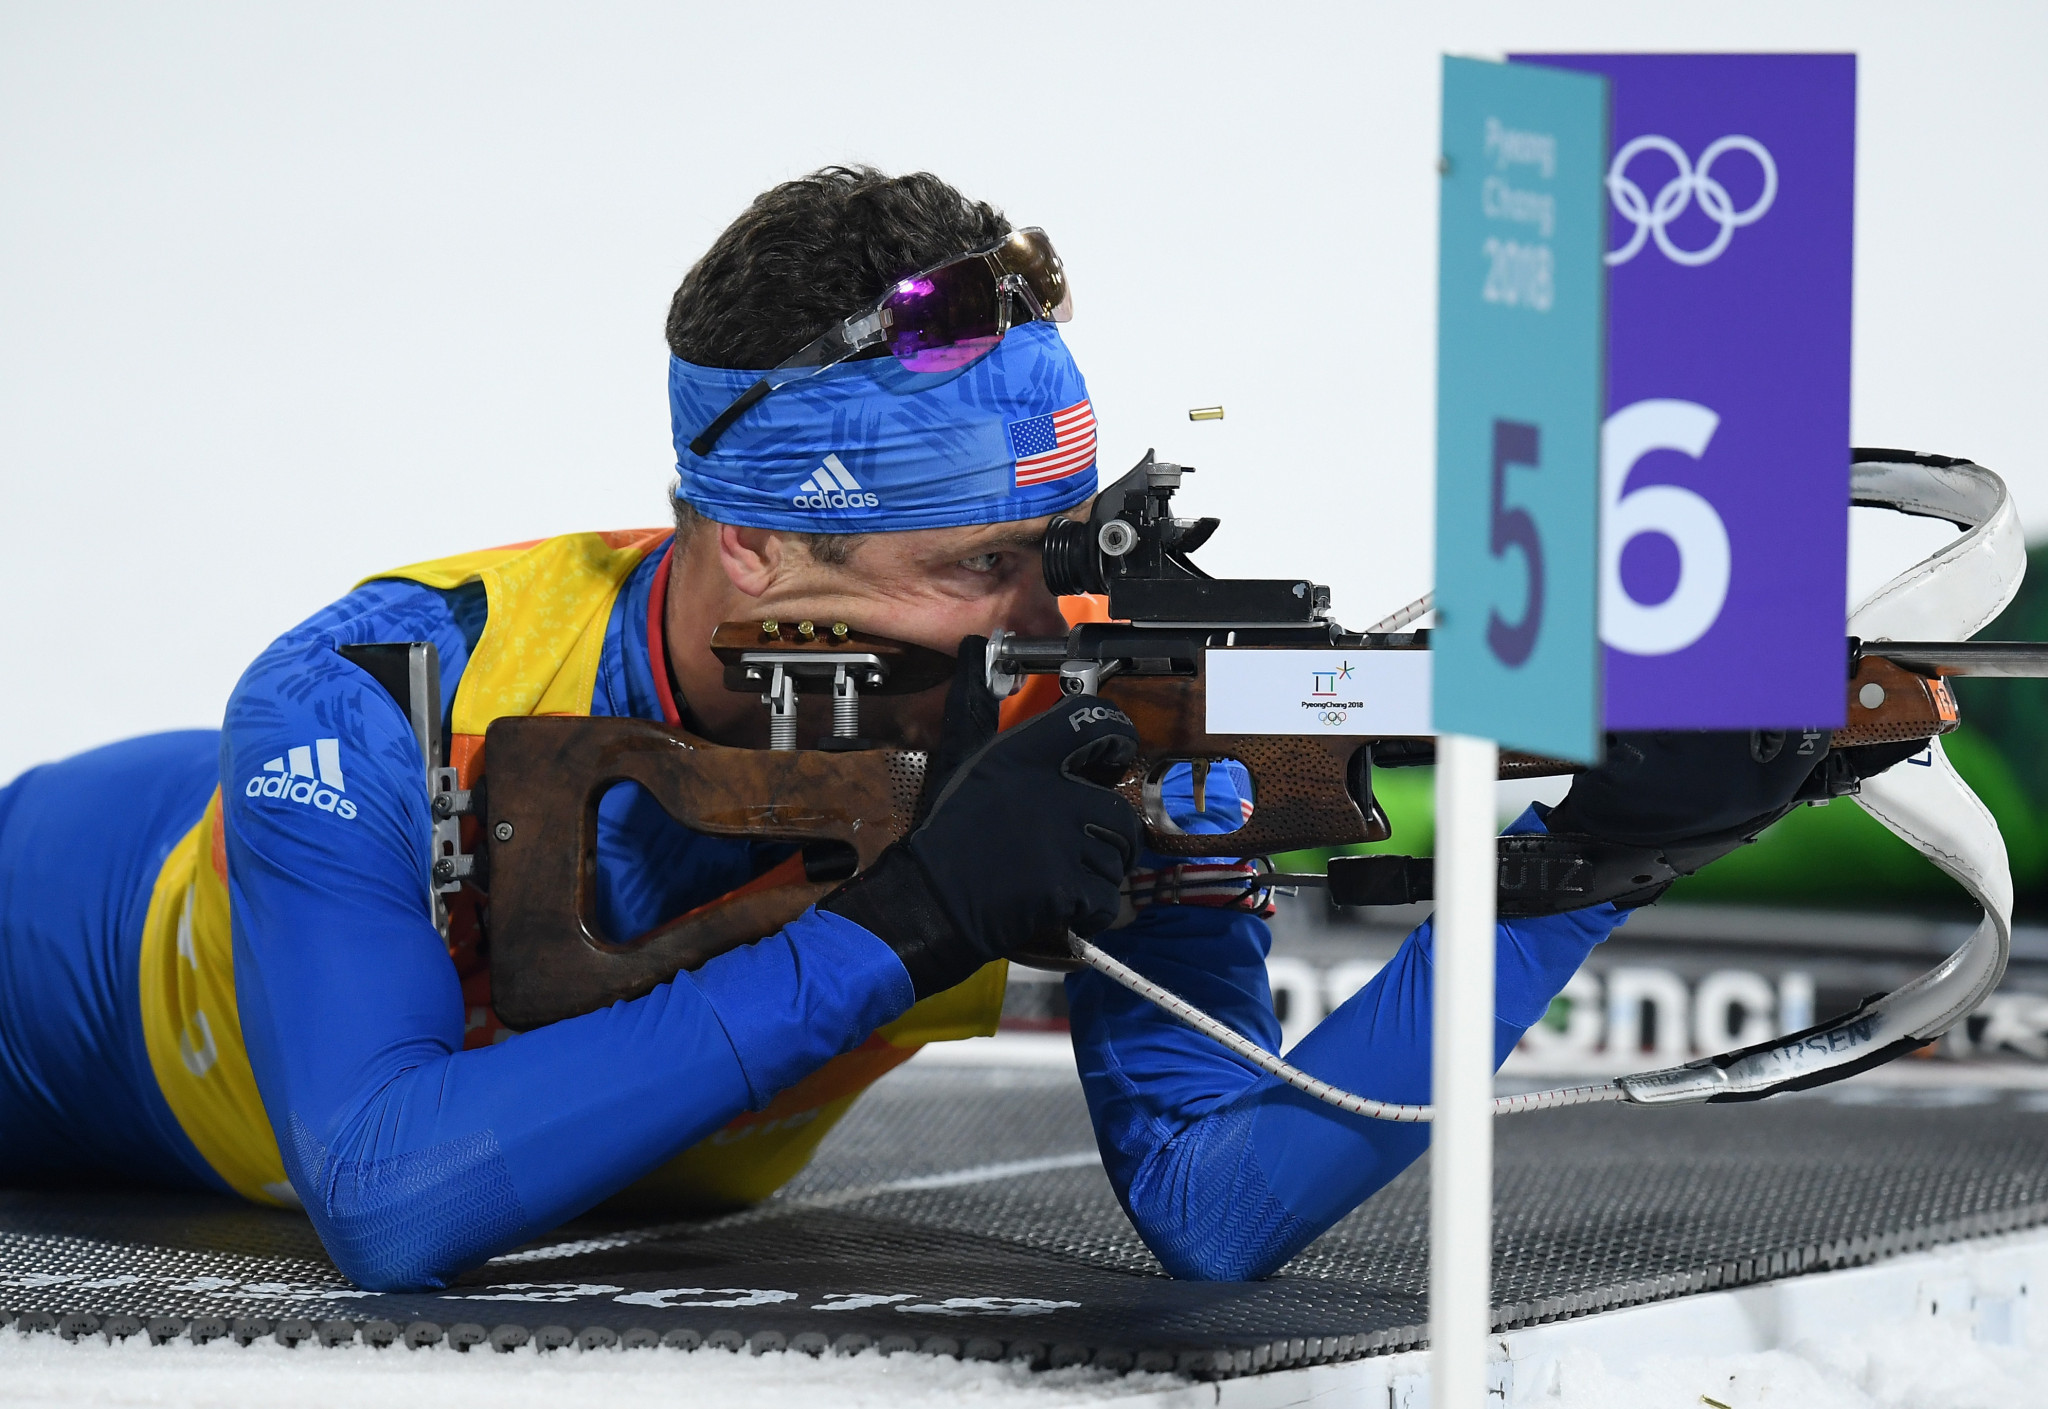 Tim Burke put US Biathlon in the international spotlight when he became the first and only American biathlete to ever lead the overall World Cup ranking in 2010 ©Getty Images